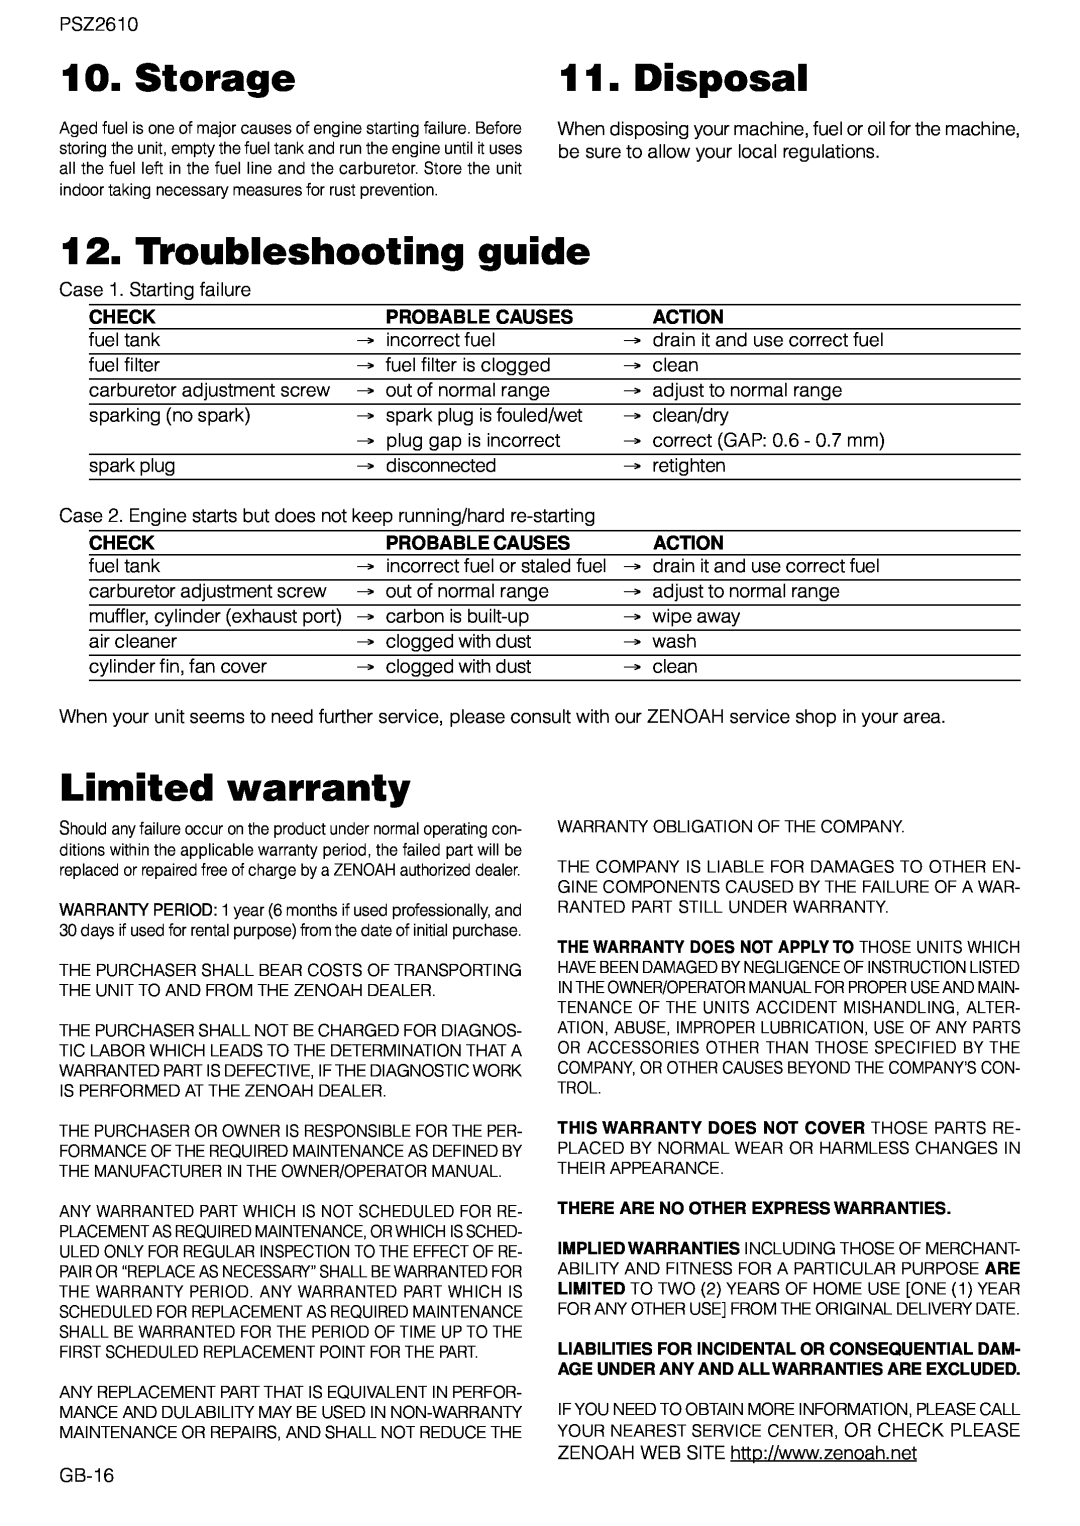 Zenoah PSZ2610 owner manual Storage, Disposal, Troubleshooting guide, Limited warranty, Check, Probable Causes, Action 